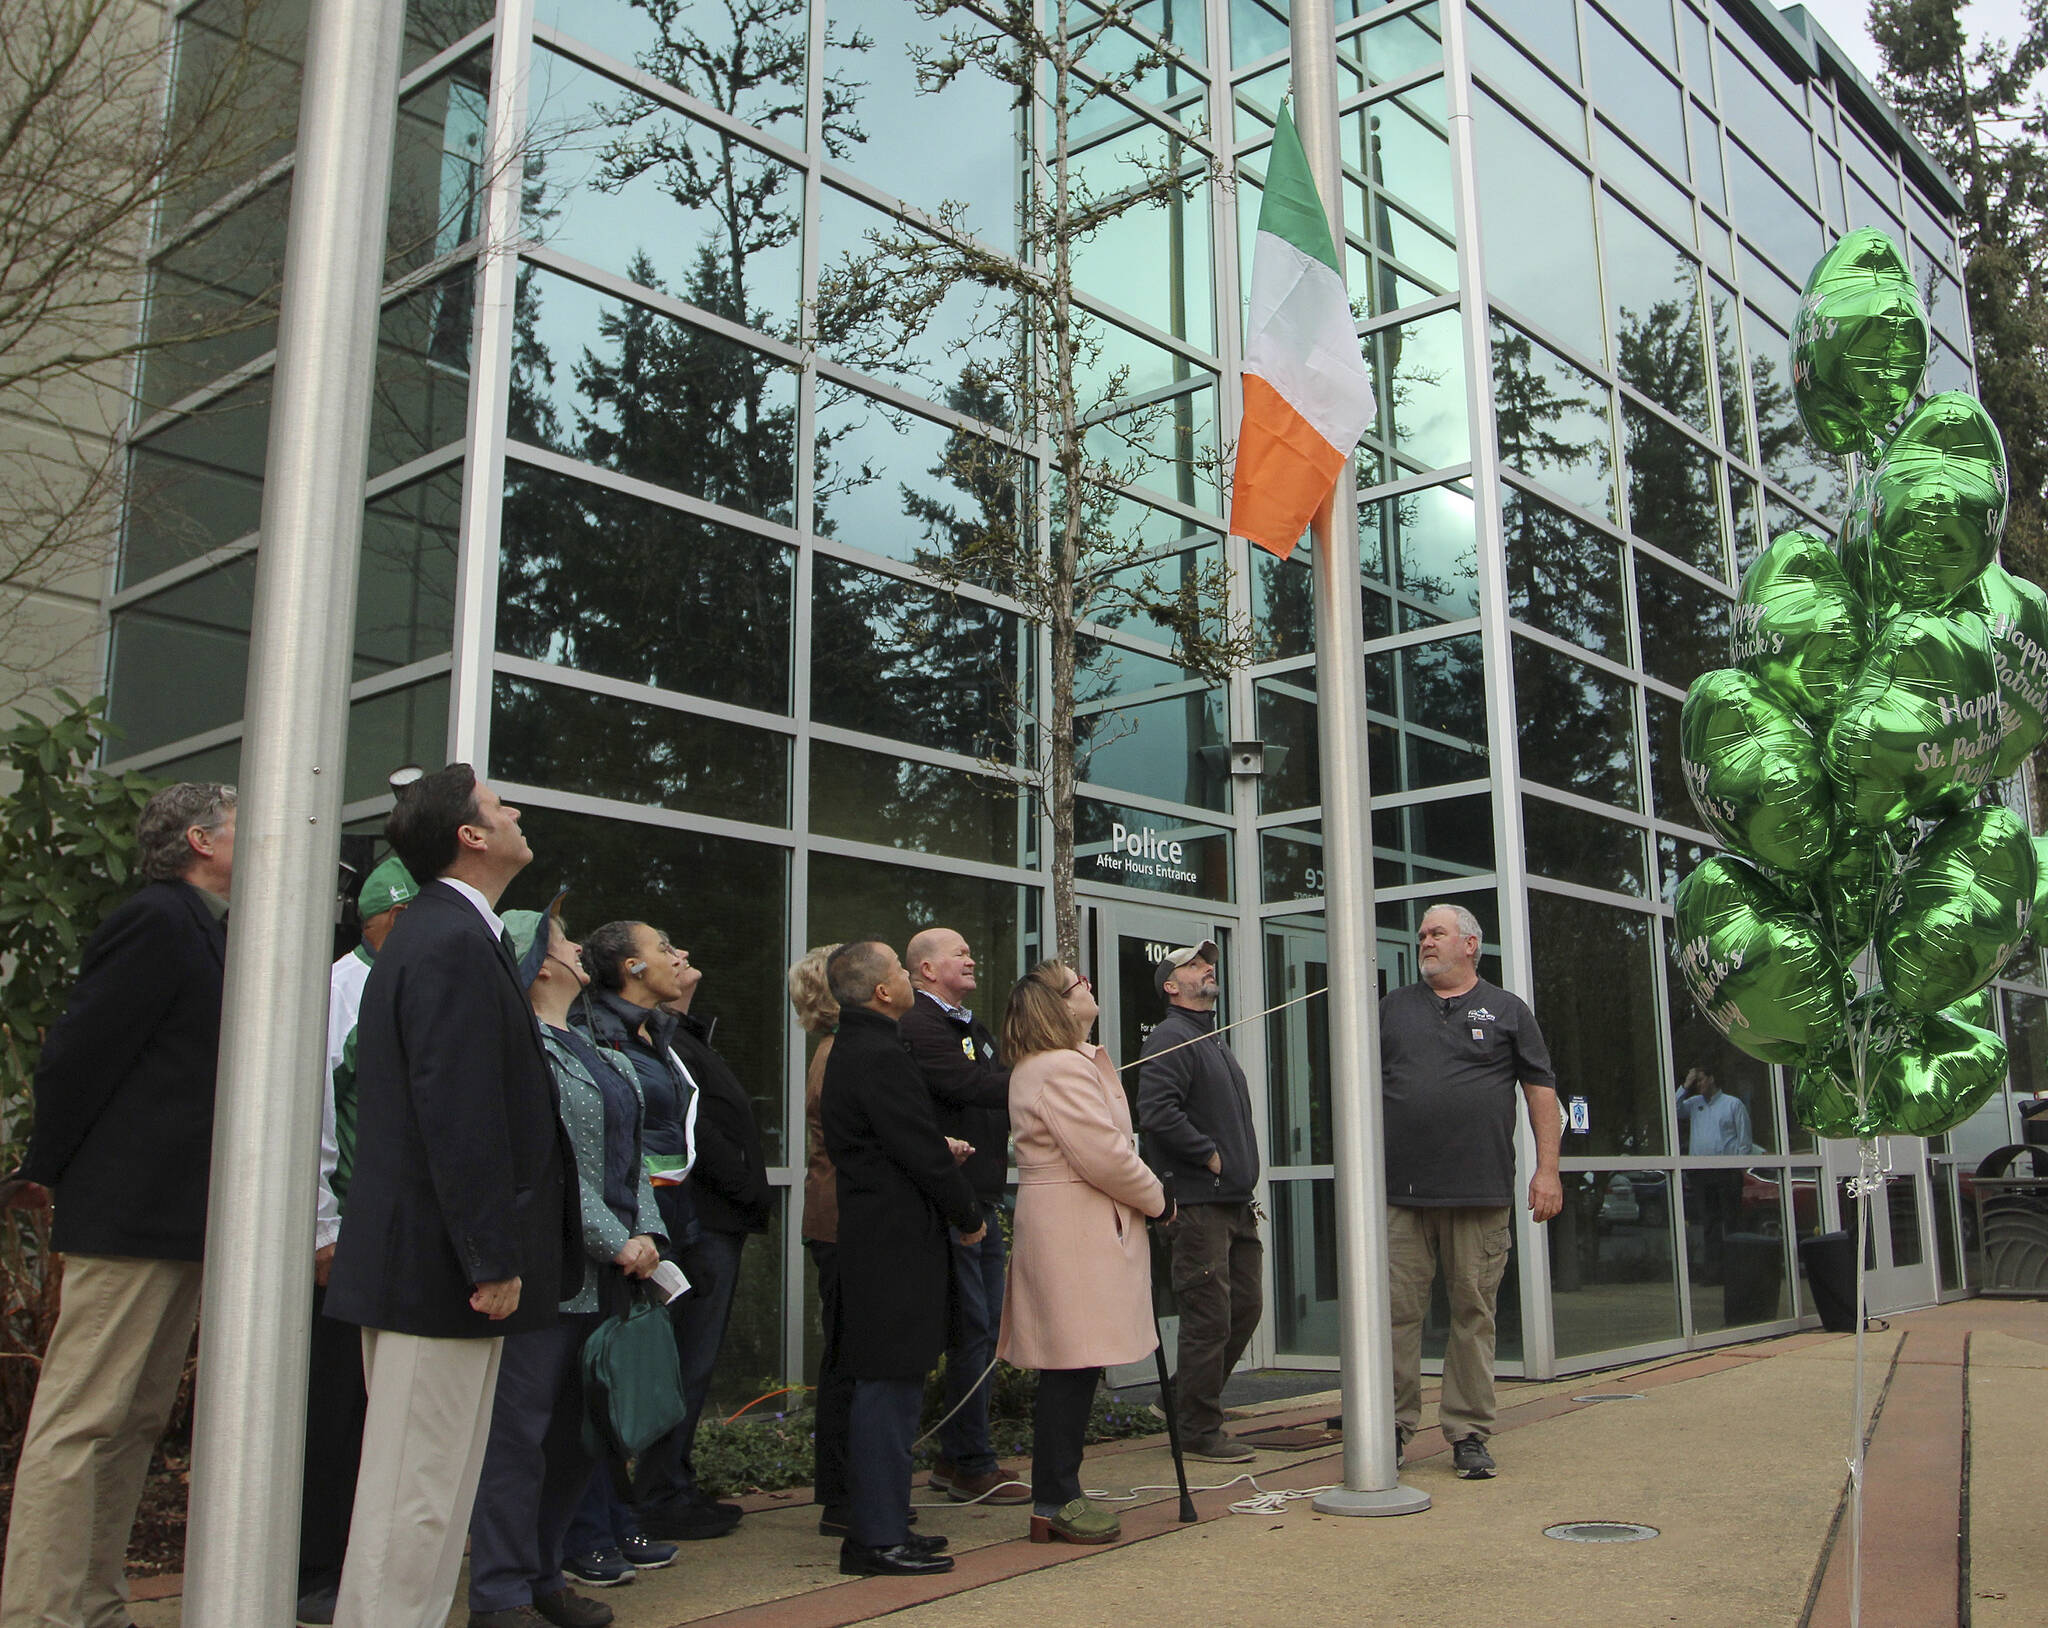 Elected officials and proud community members with Irish heritage assist in raising the Irish flag on March 17.